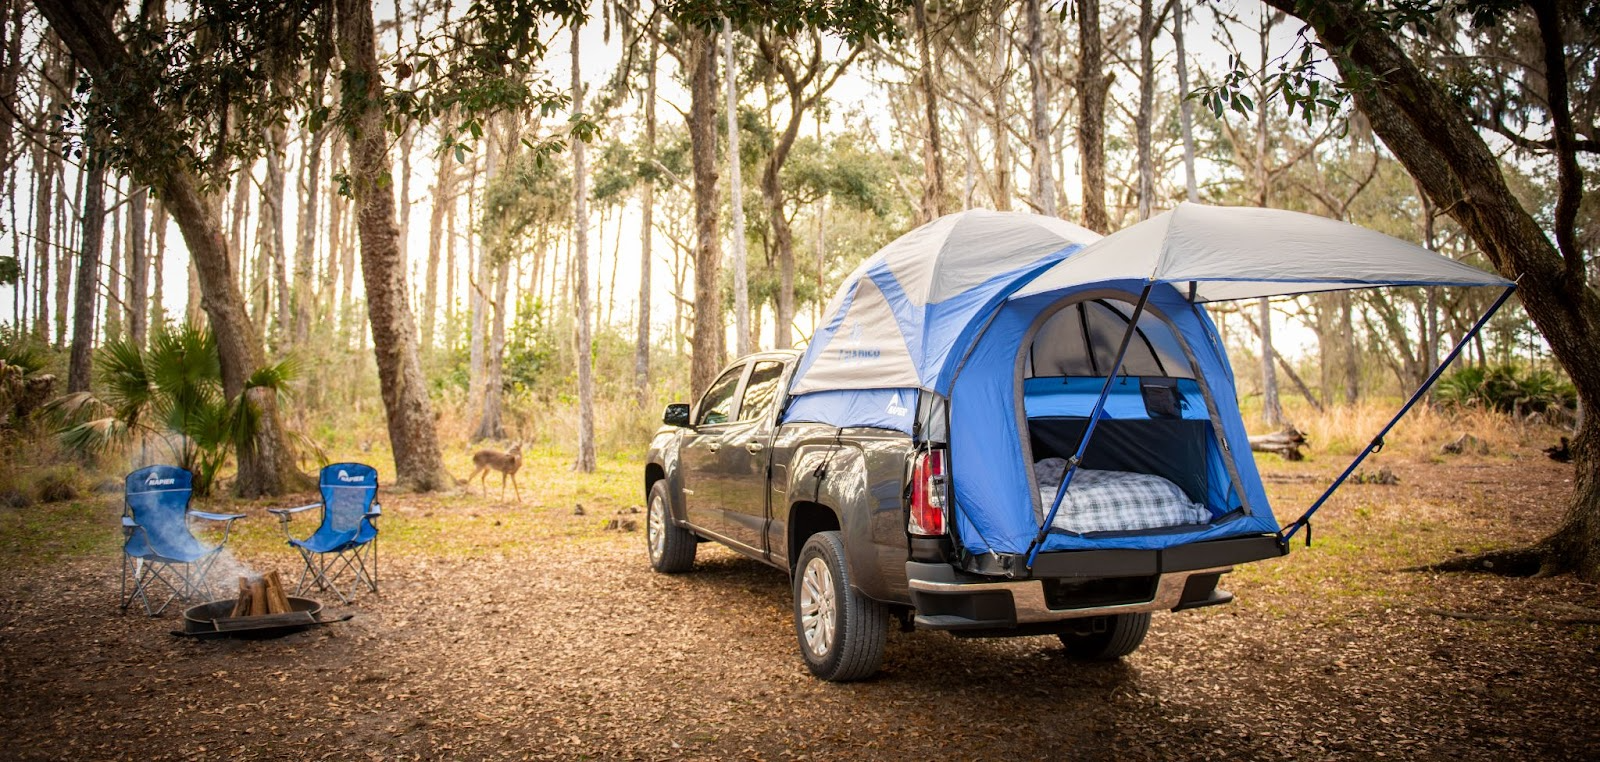 What are truck bed tents? Sportz tent is seen parked at a campsite with a deer